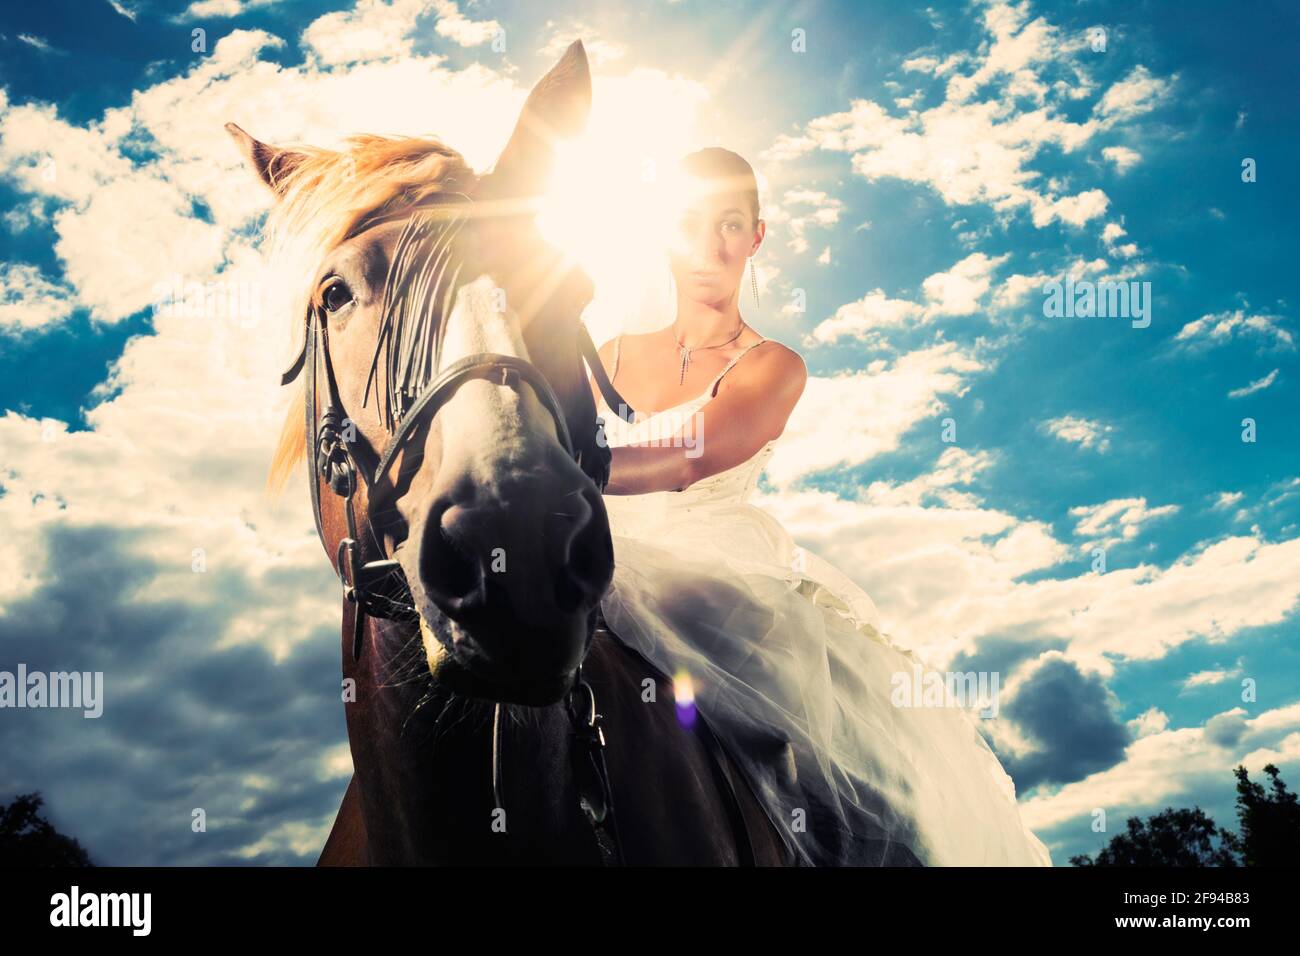 Young Bride in wedding dress riding a horse, backlit picture, dreamy mood Stock Photo